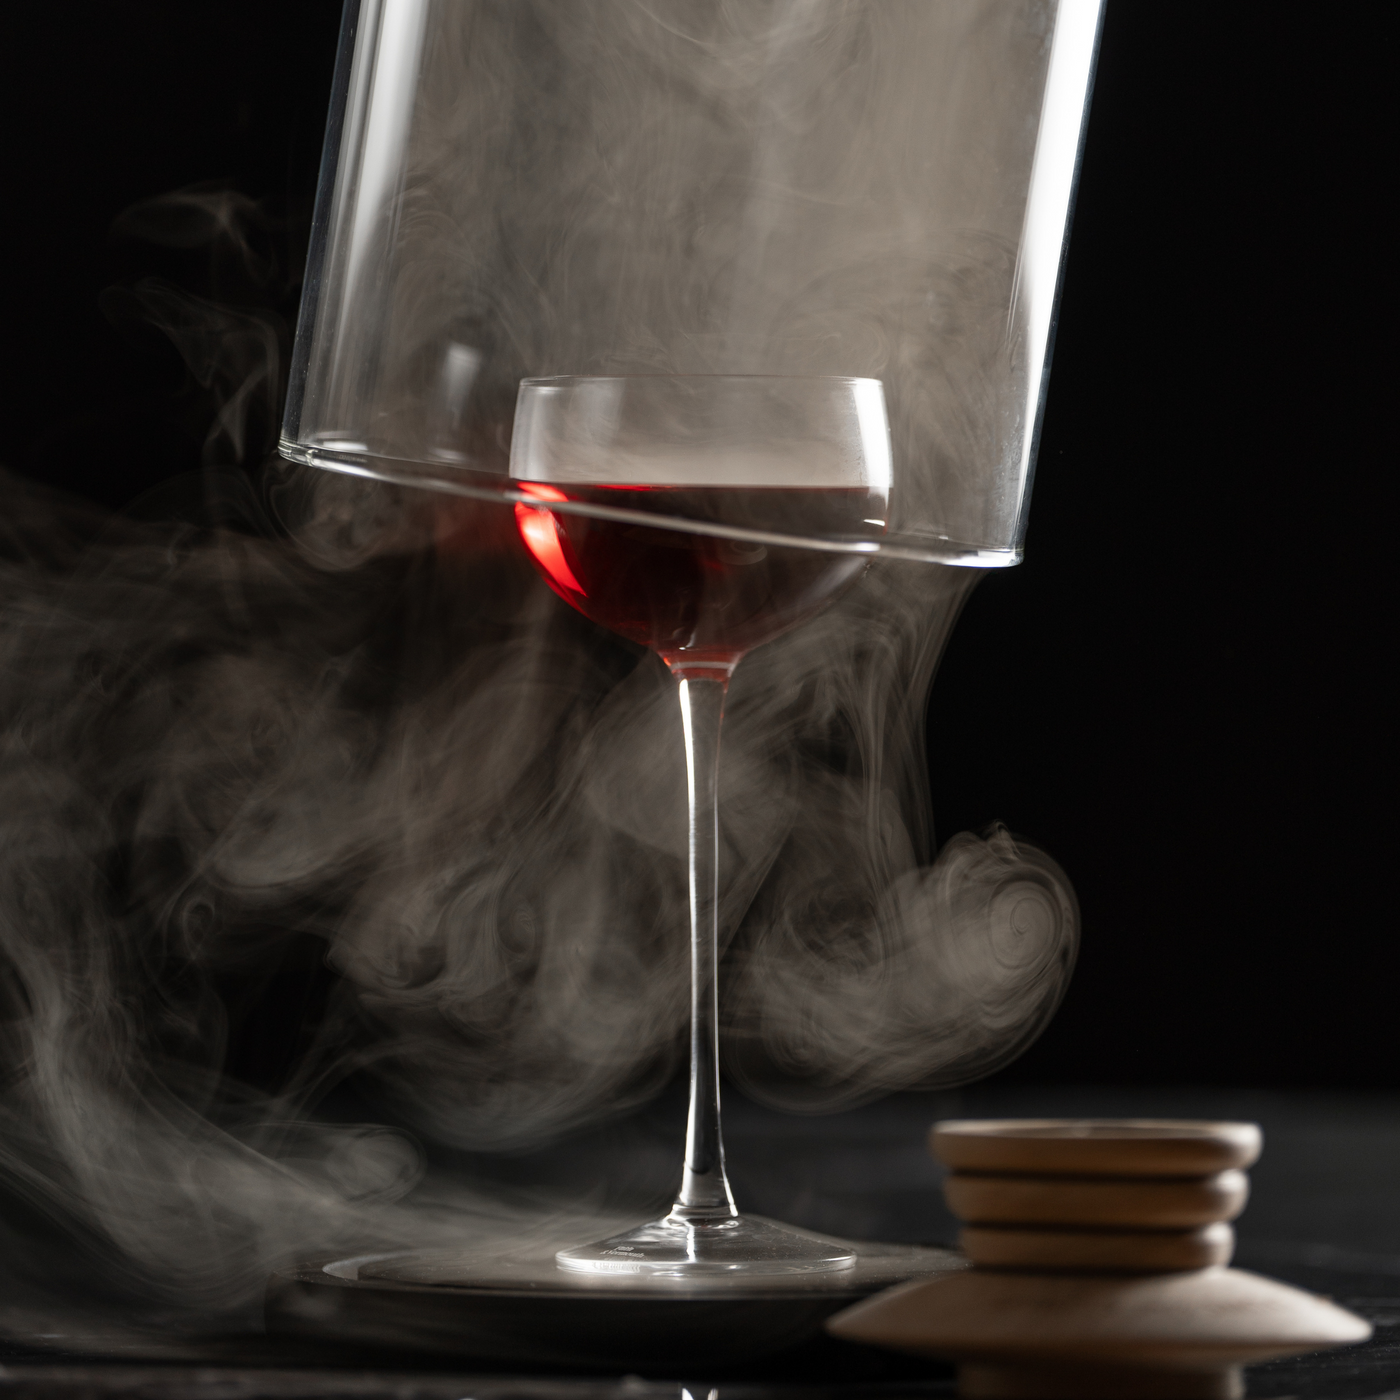 Smoked glass and manhattan cocktail with glass cloche being lifted